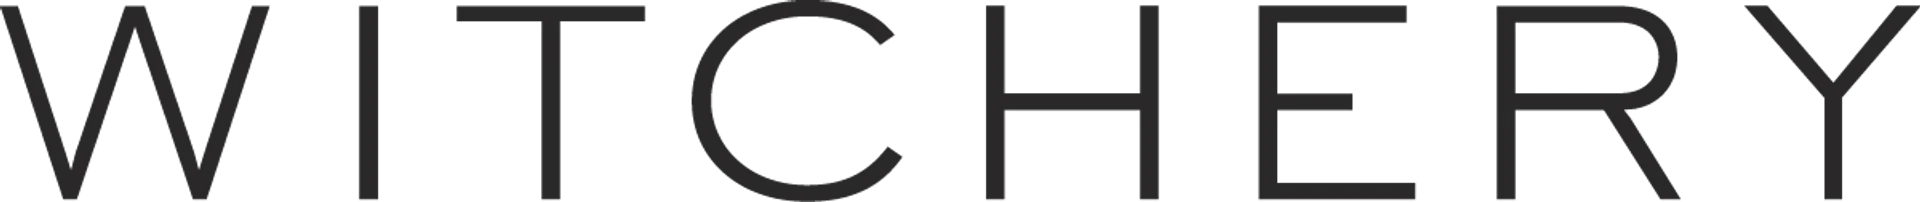 WITCHERY logo of current flyer